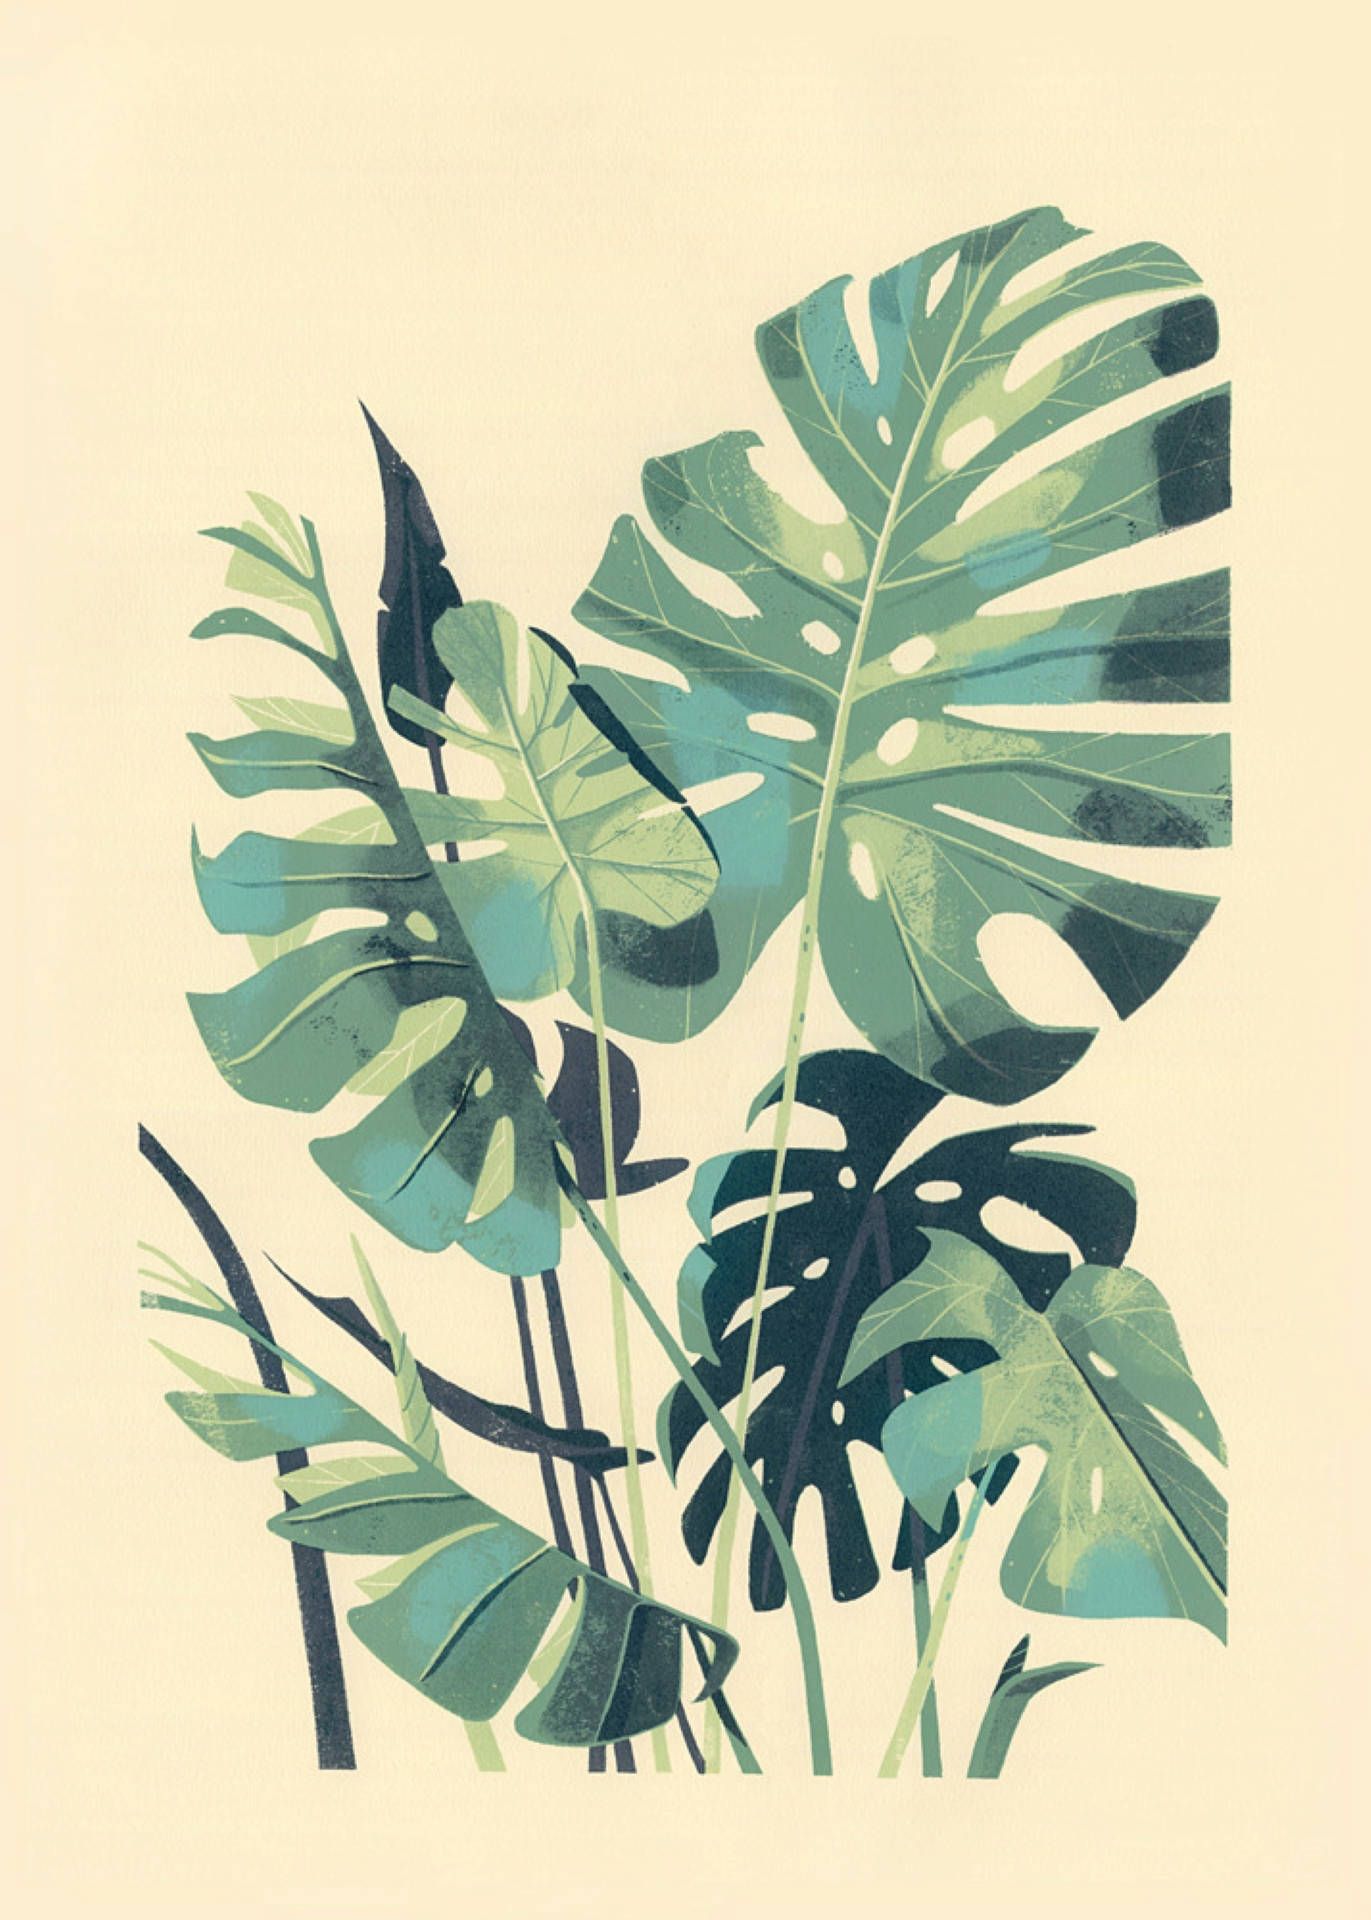 A screen print of a monstera plant by the artist Faye Toogood - Monstera